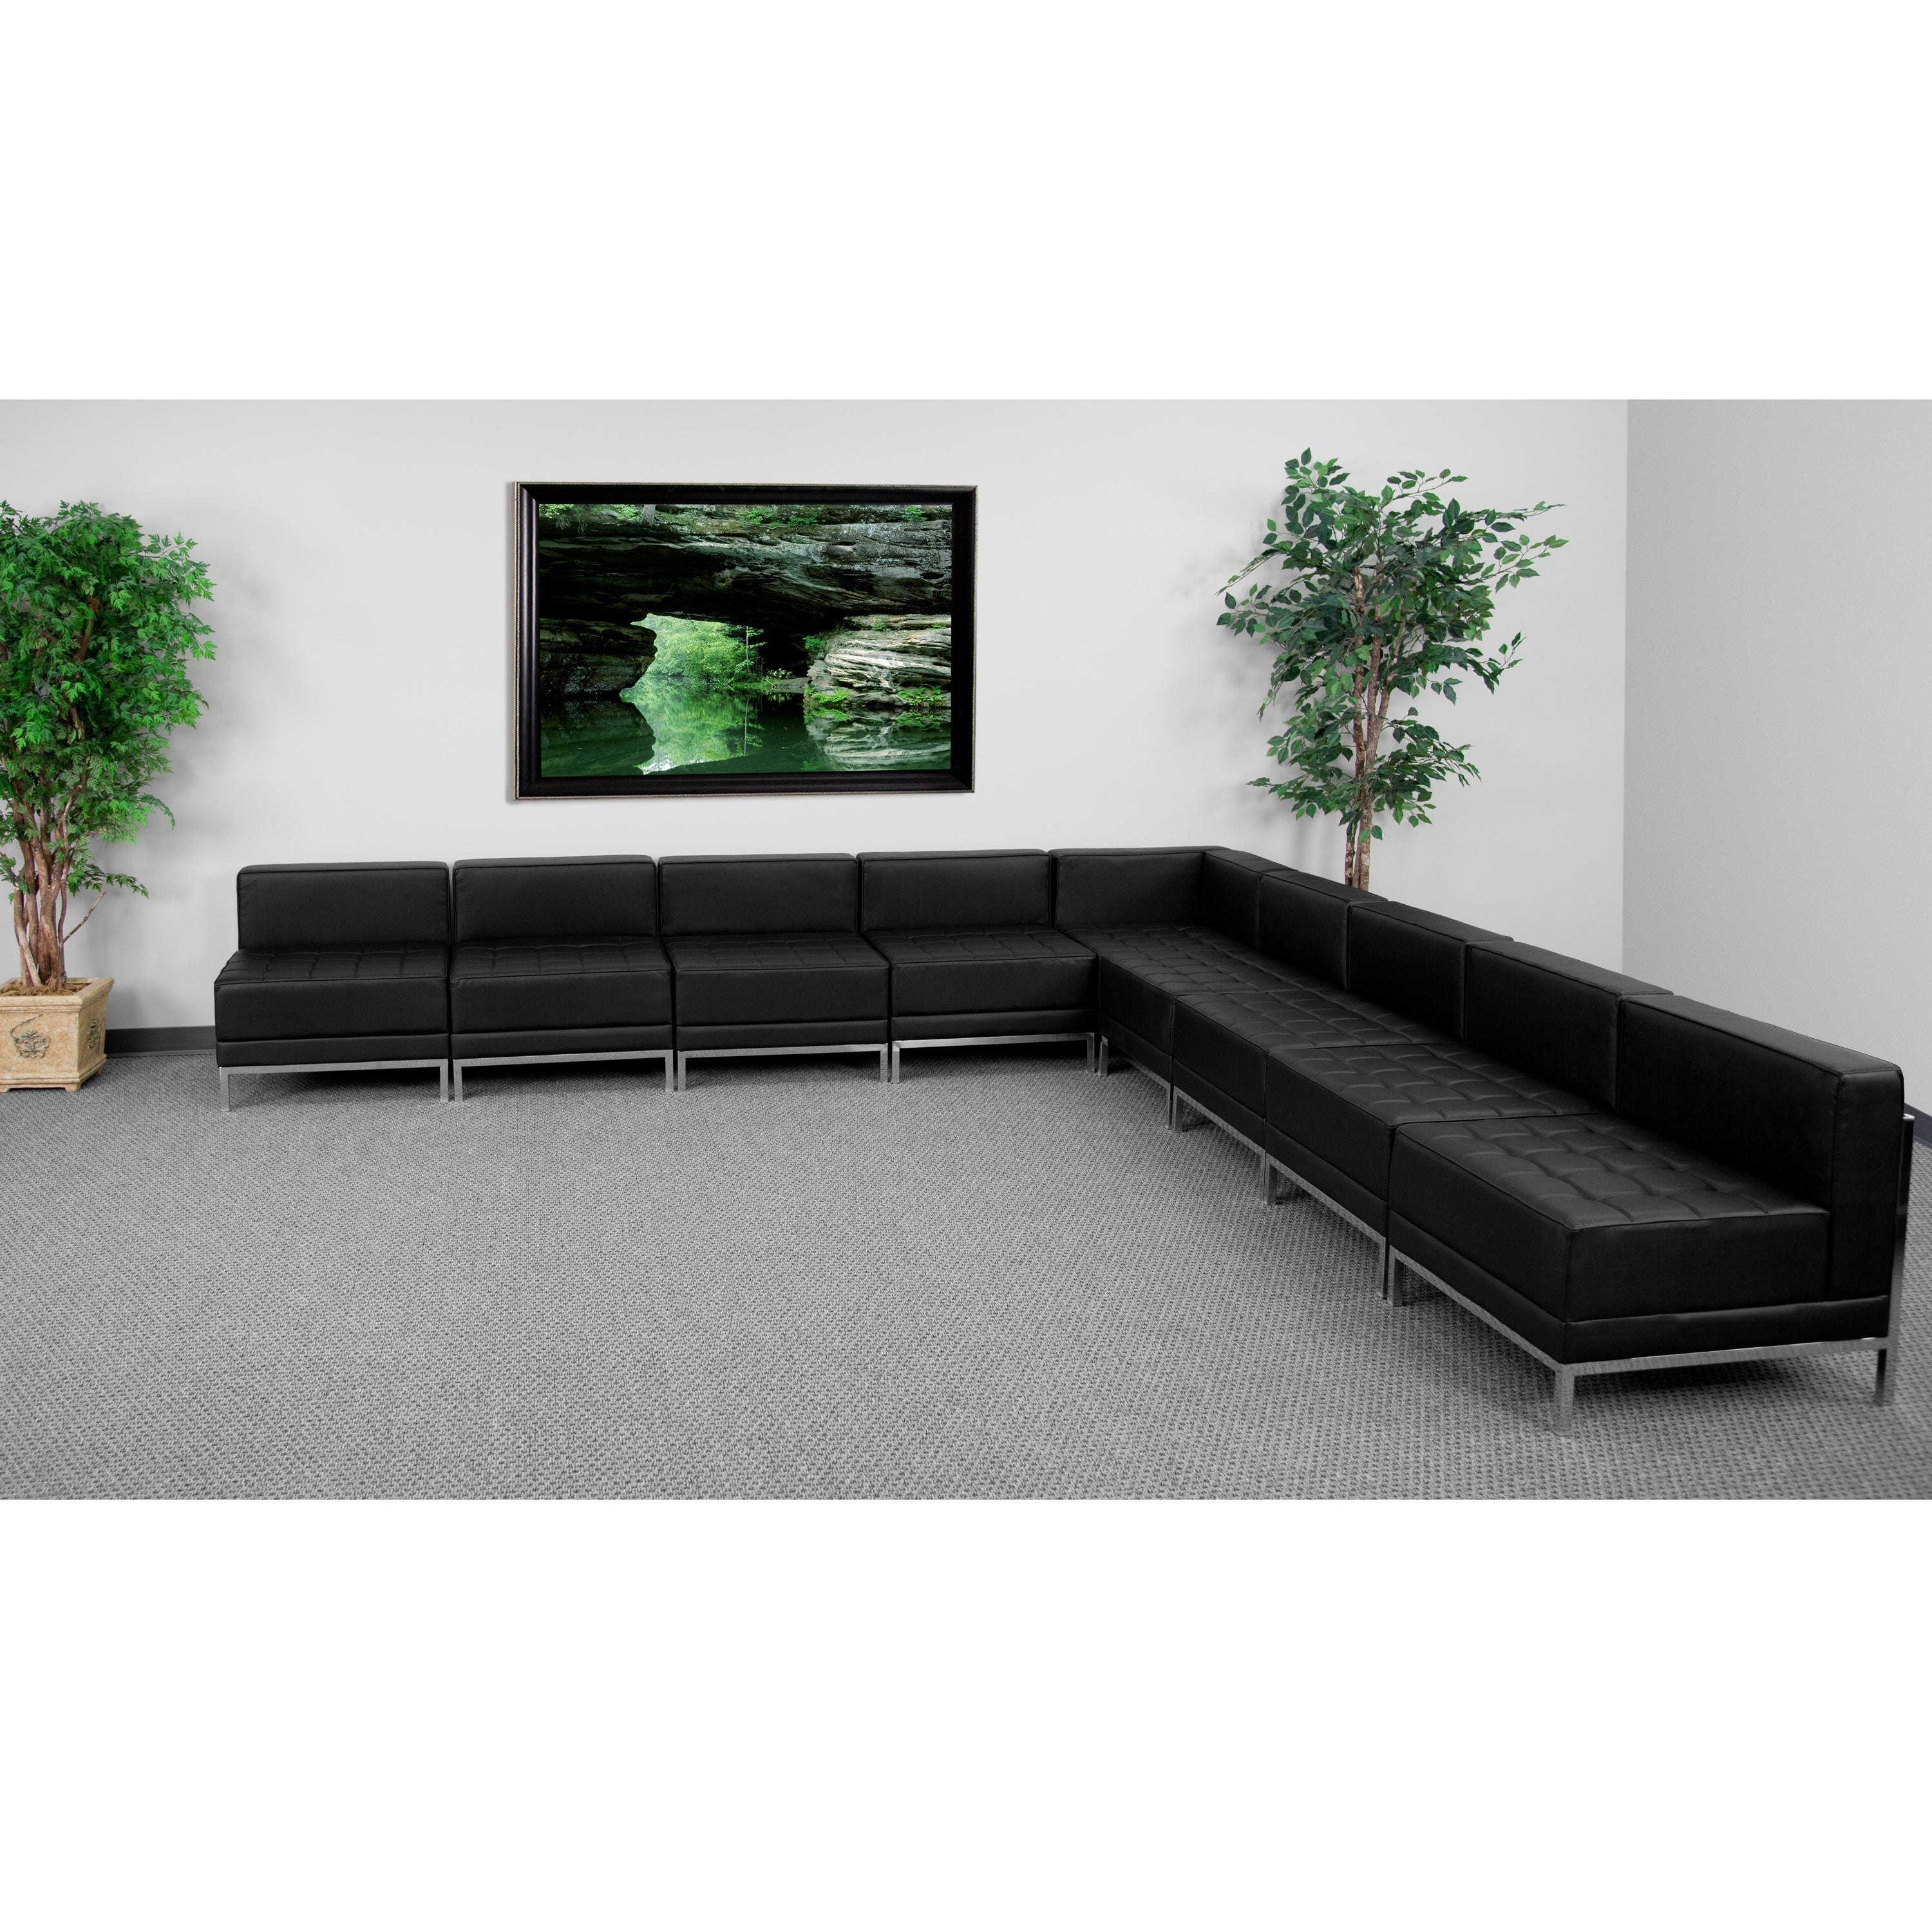 HERCULES Imagination Series LeatherSoft Sectional Configuration, 9 Pieces-Modular Reception Set-Flash Furniture-Wall2Wall Furnishings